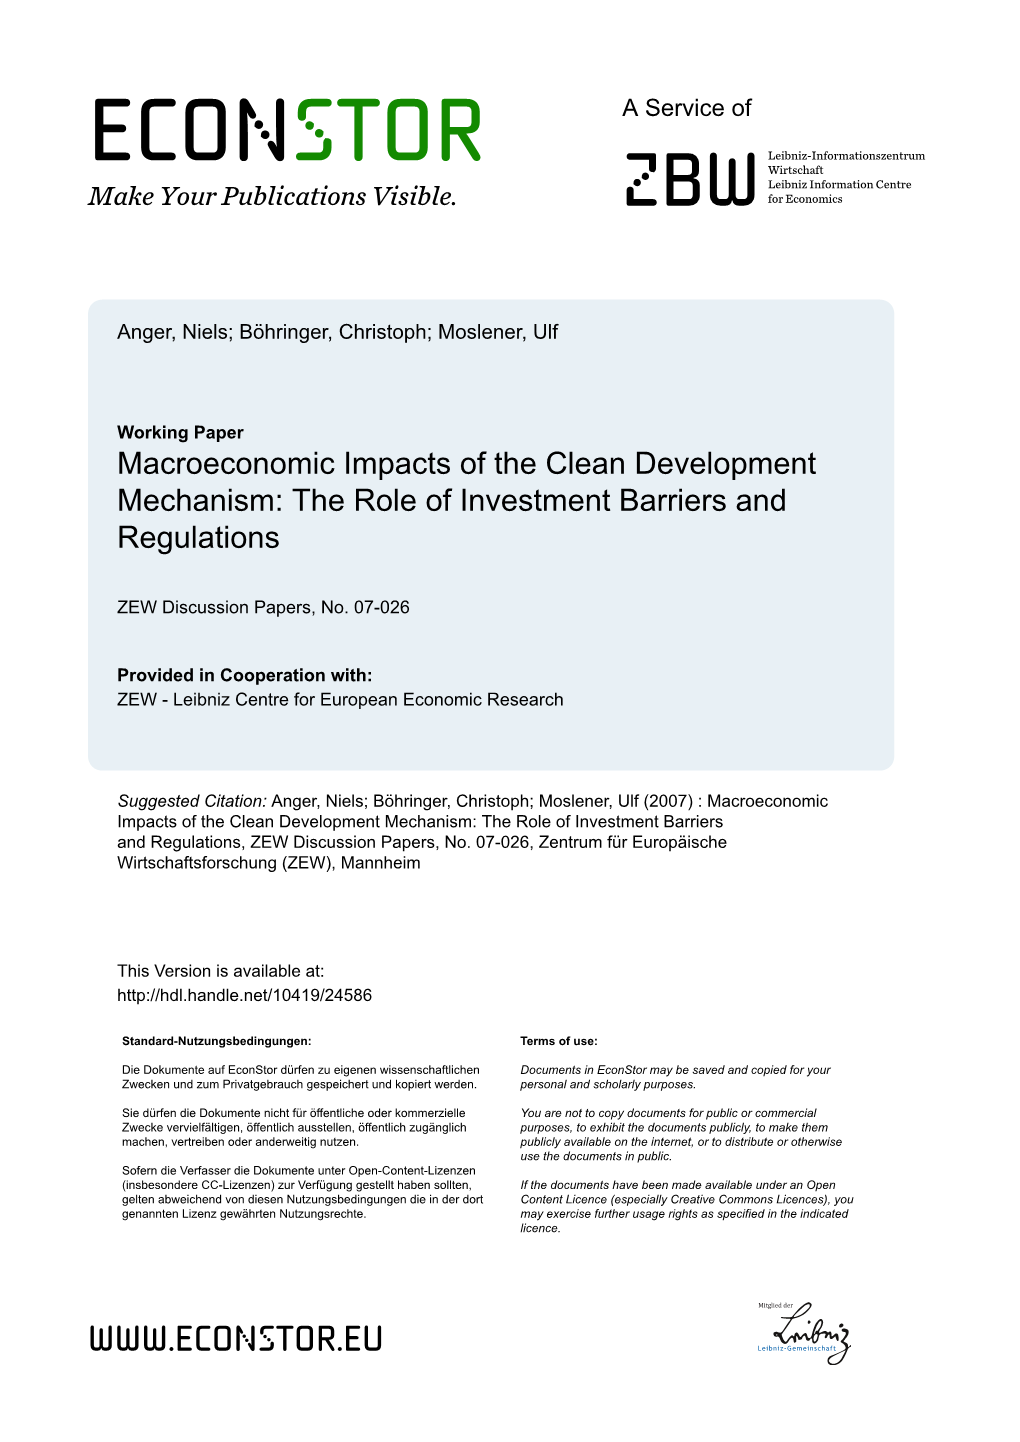 Macroeconomic Impacts of the Clean Development Mechanism: the Role of Investment Barriers and Regulations